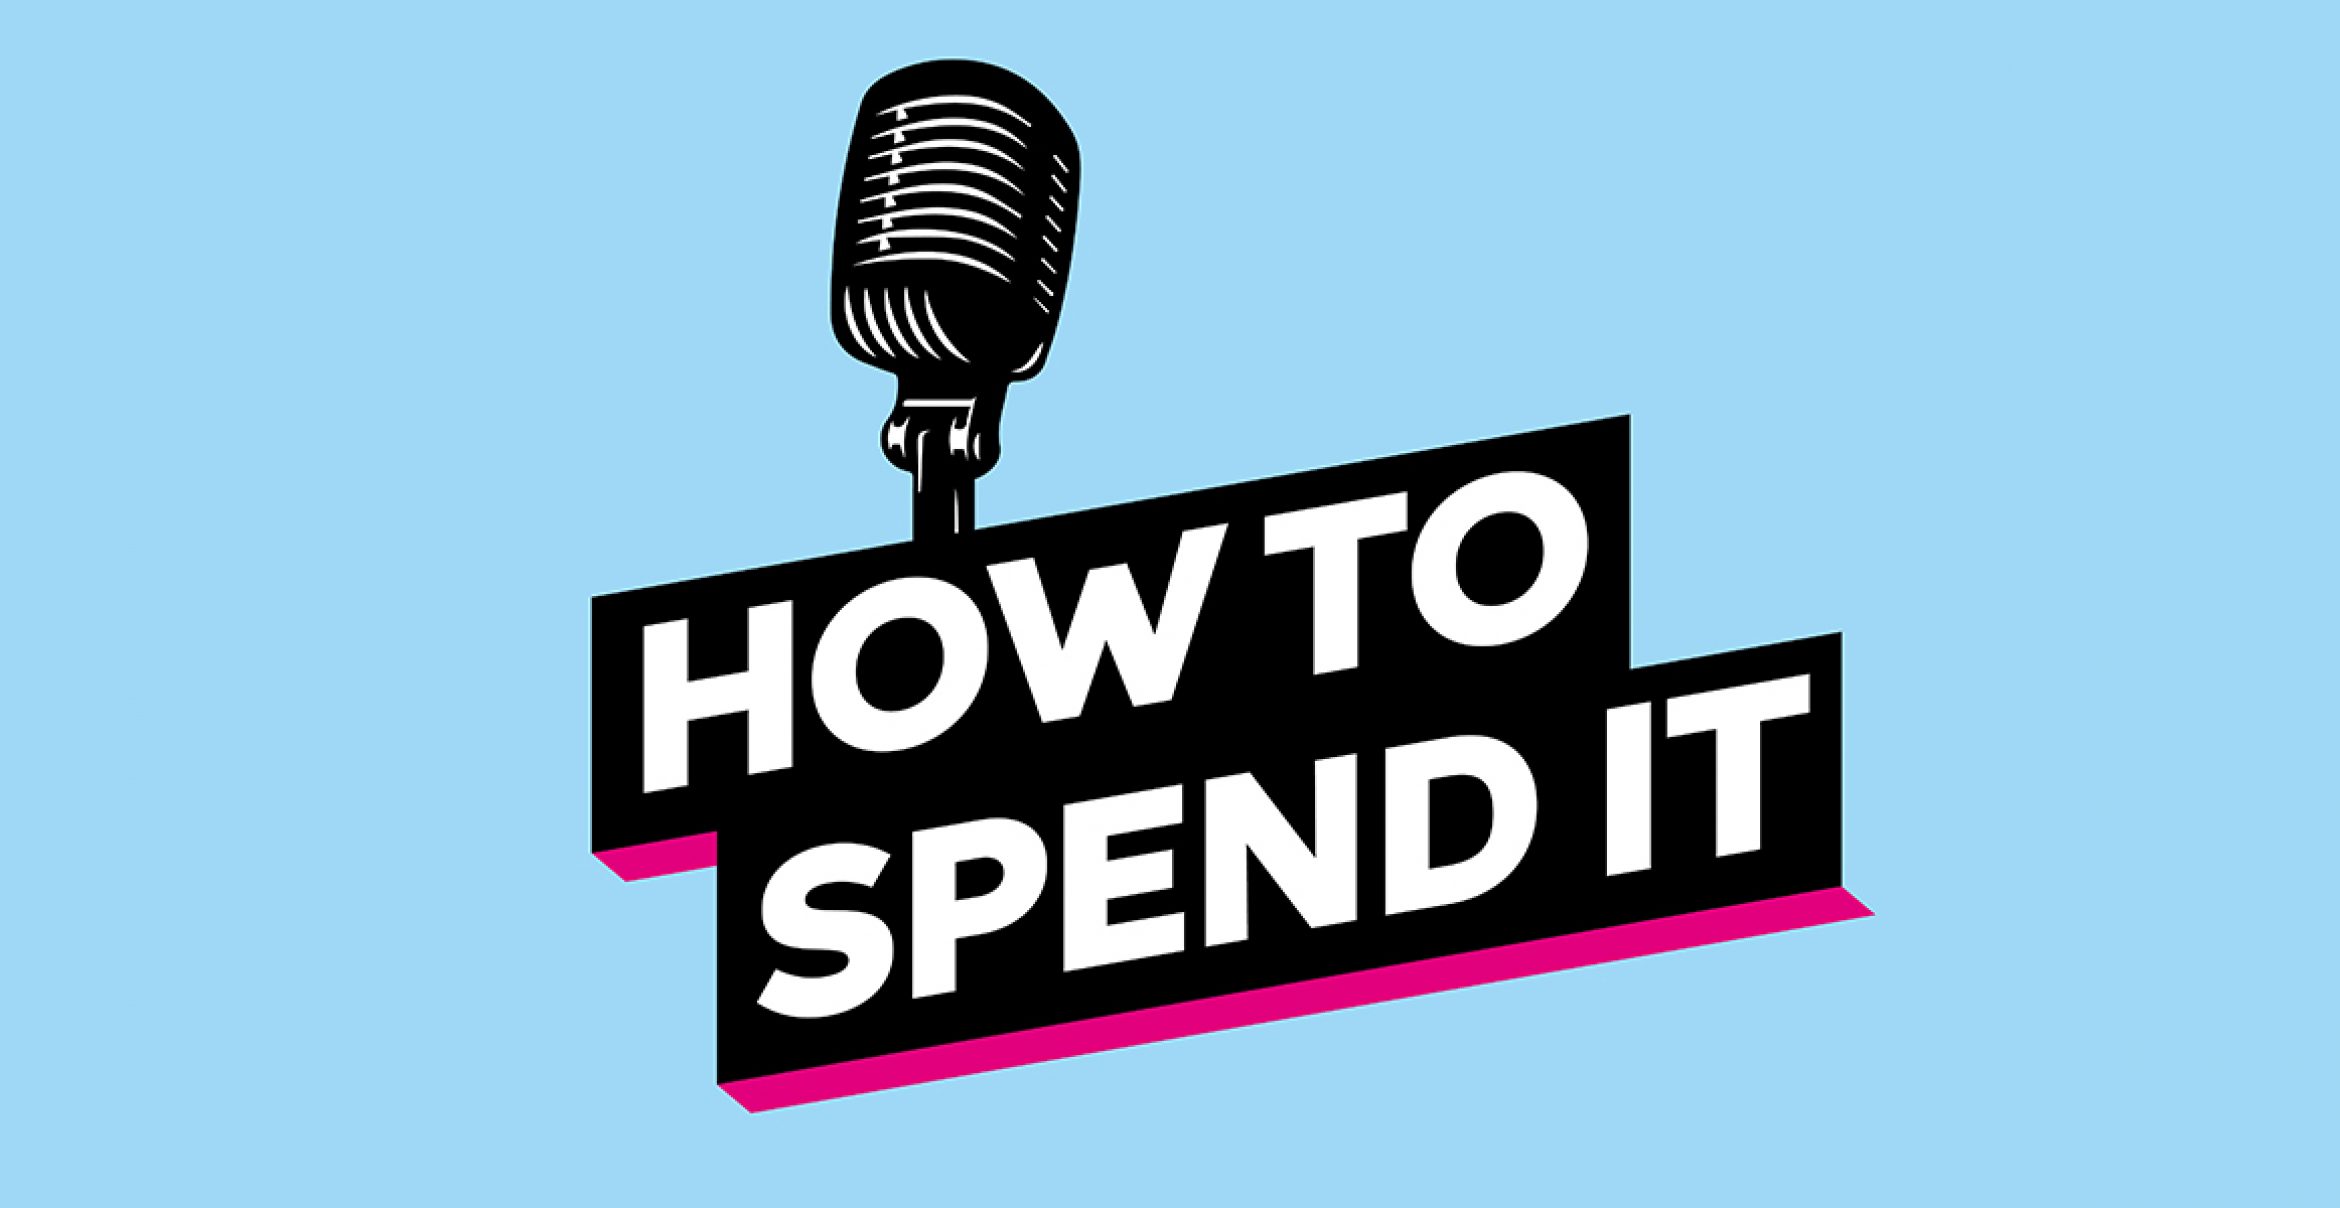 How to Spend it #2: Frank Thelen